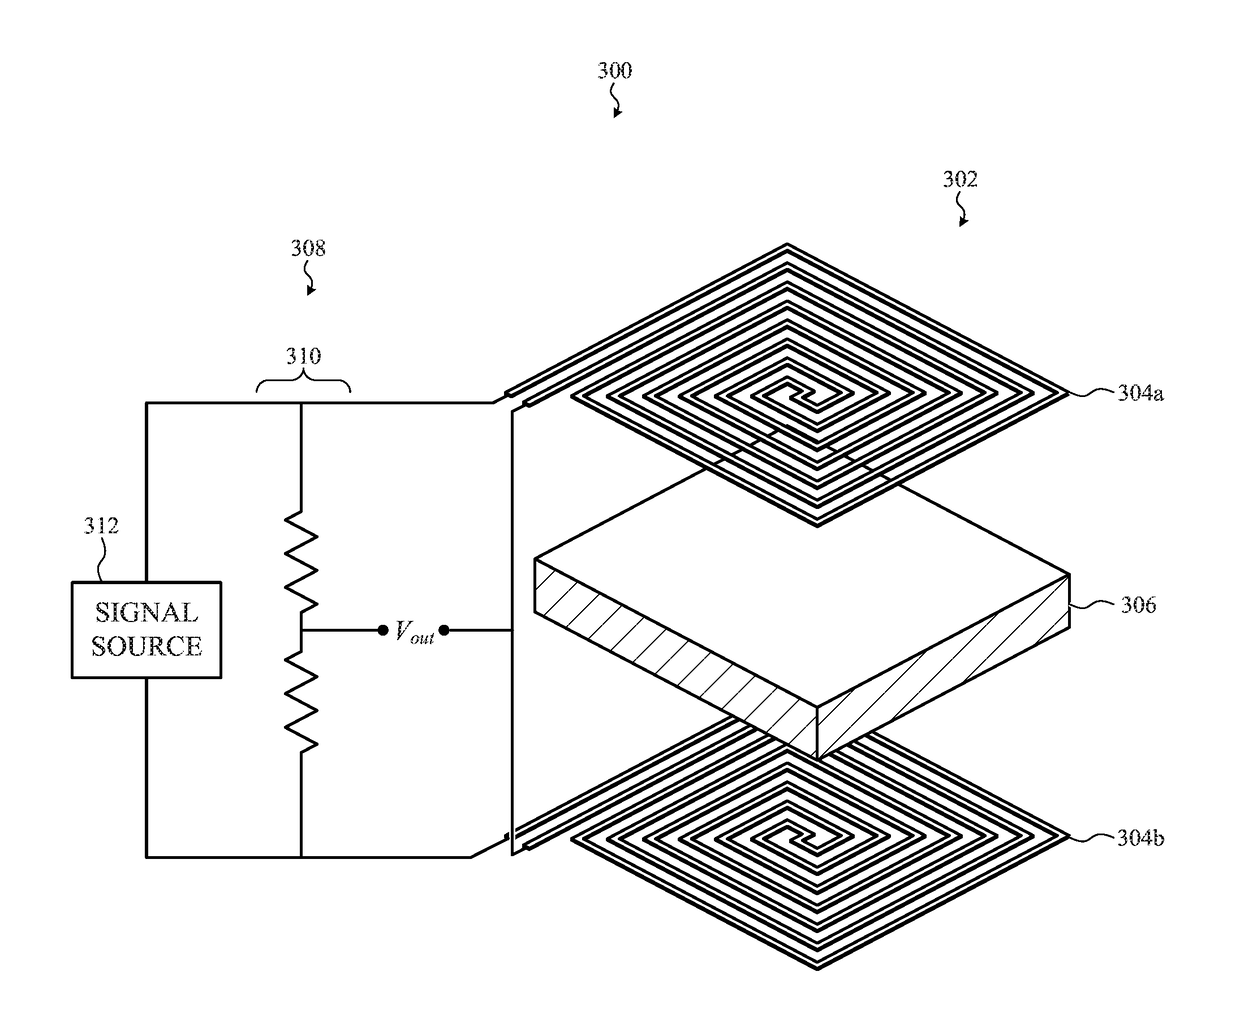 Magnetic Interference Avoidance in Resistive Sensors